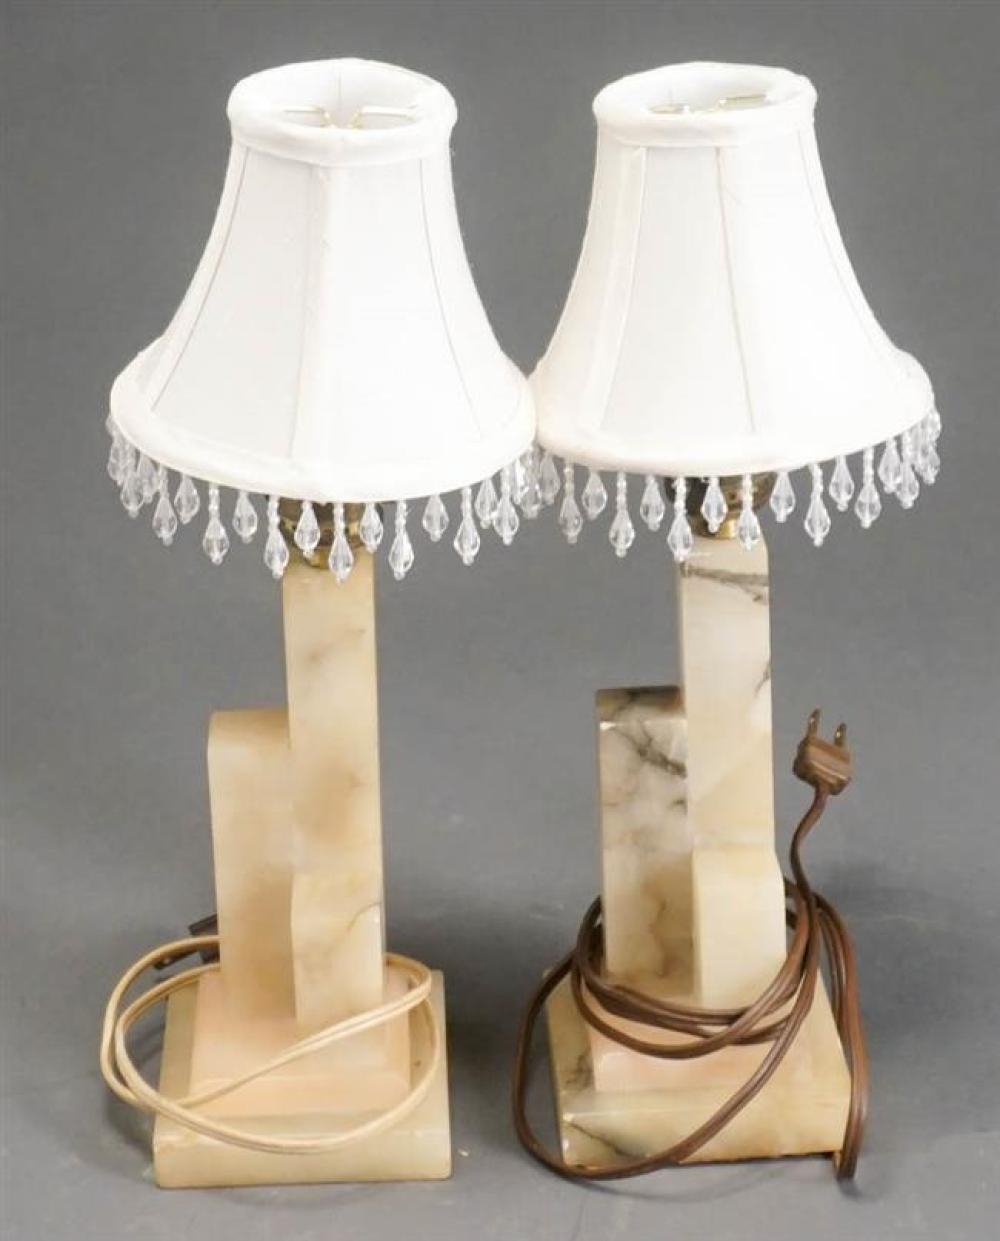 PAIR OF ALABASTER TABLE LAMPS,